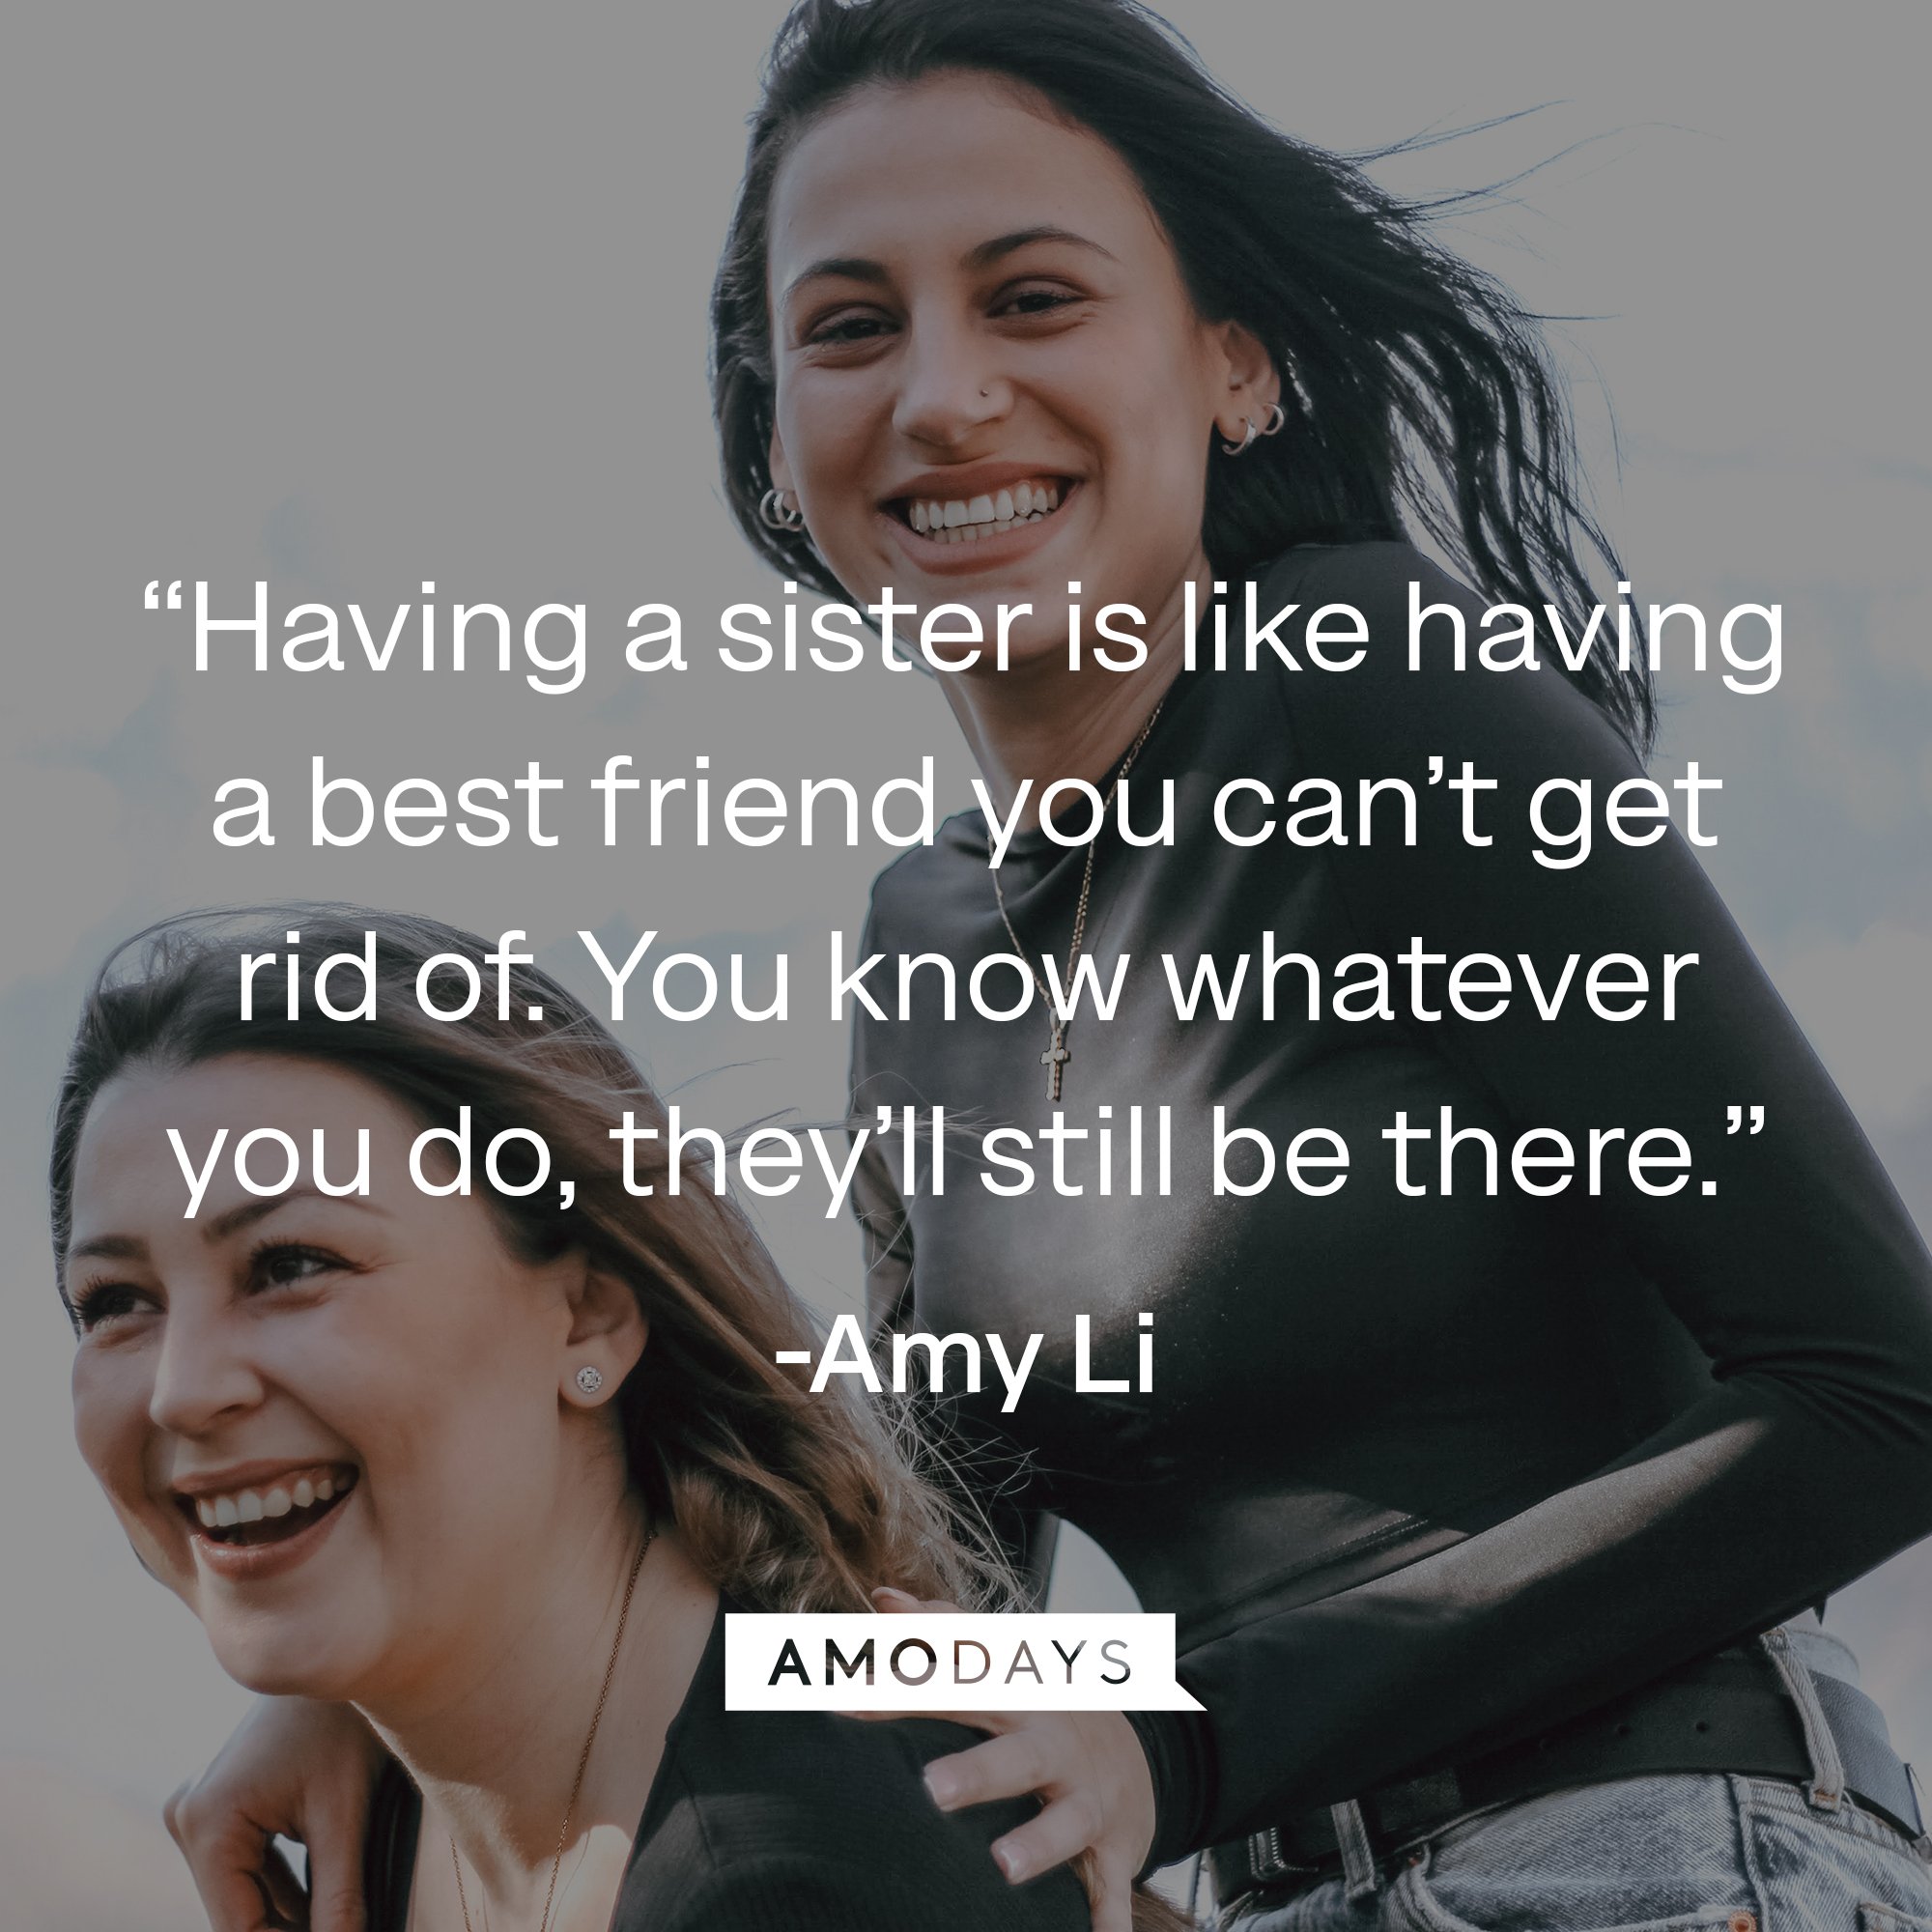 Amy Li's quote: “Having a sister is like having a best friend you can’t get rid of. You know whatever you do, they’ll still be there.” | Image: AmoDays